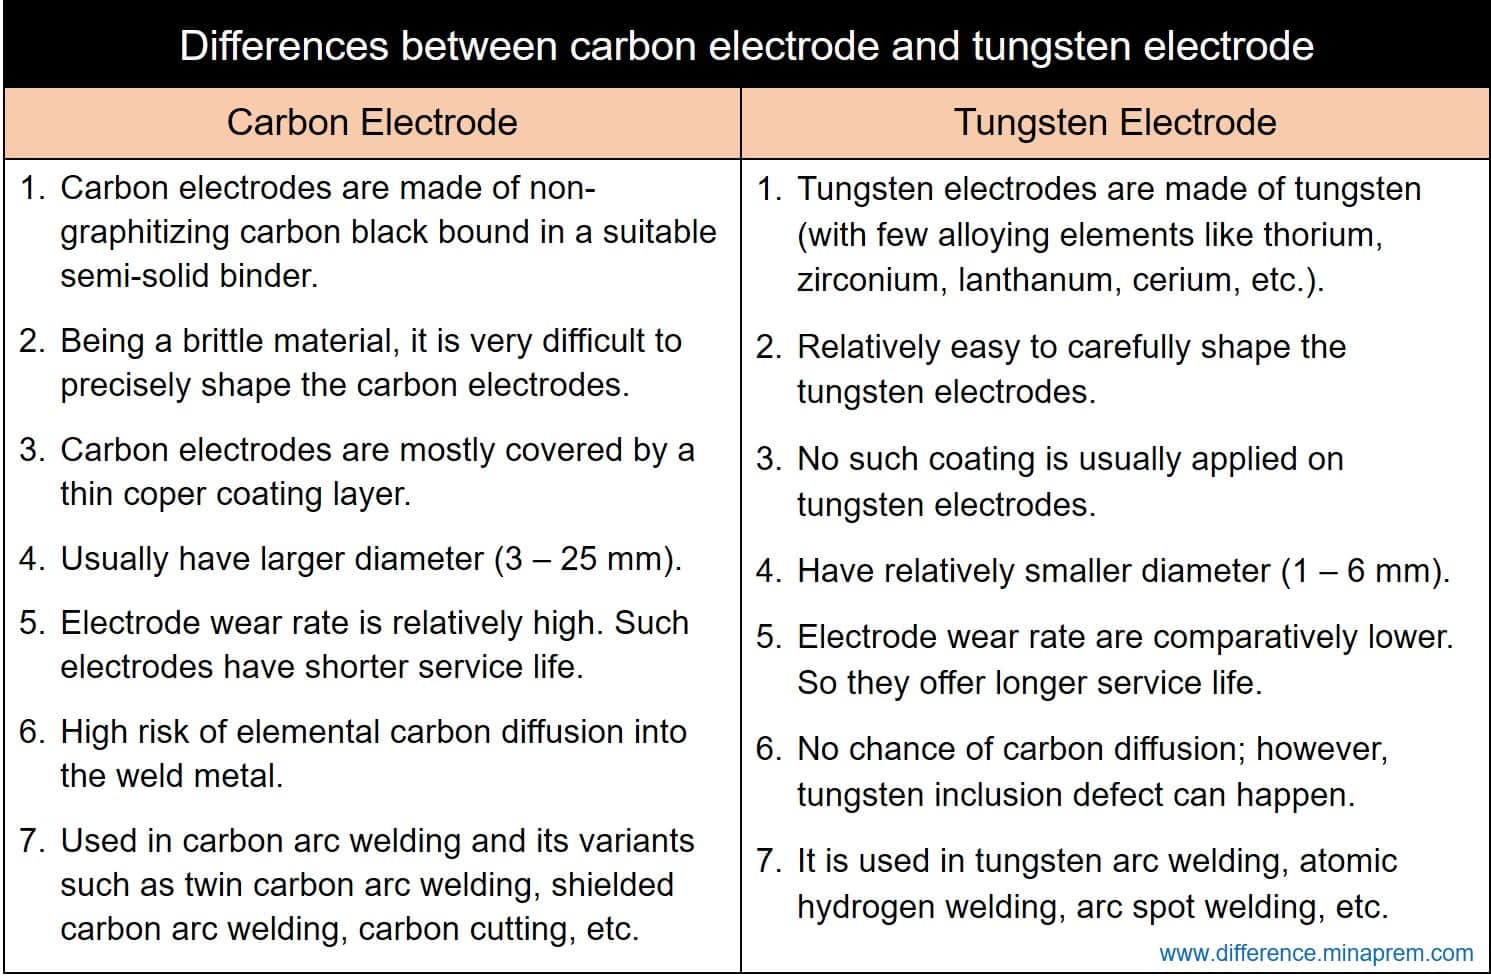 Difference between carbon electrode and tungsten electrode for arc welding